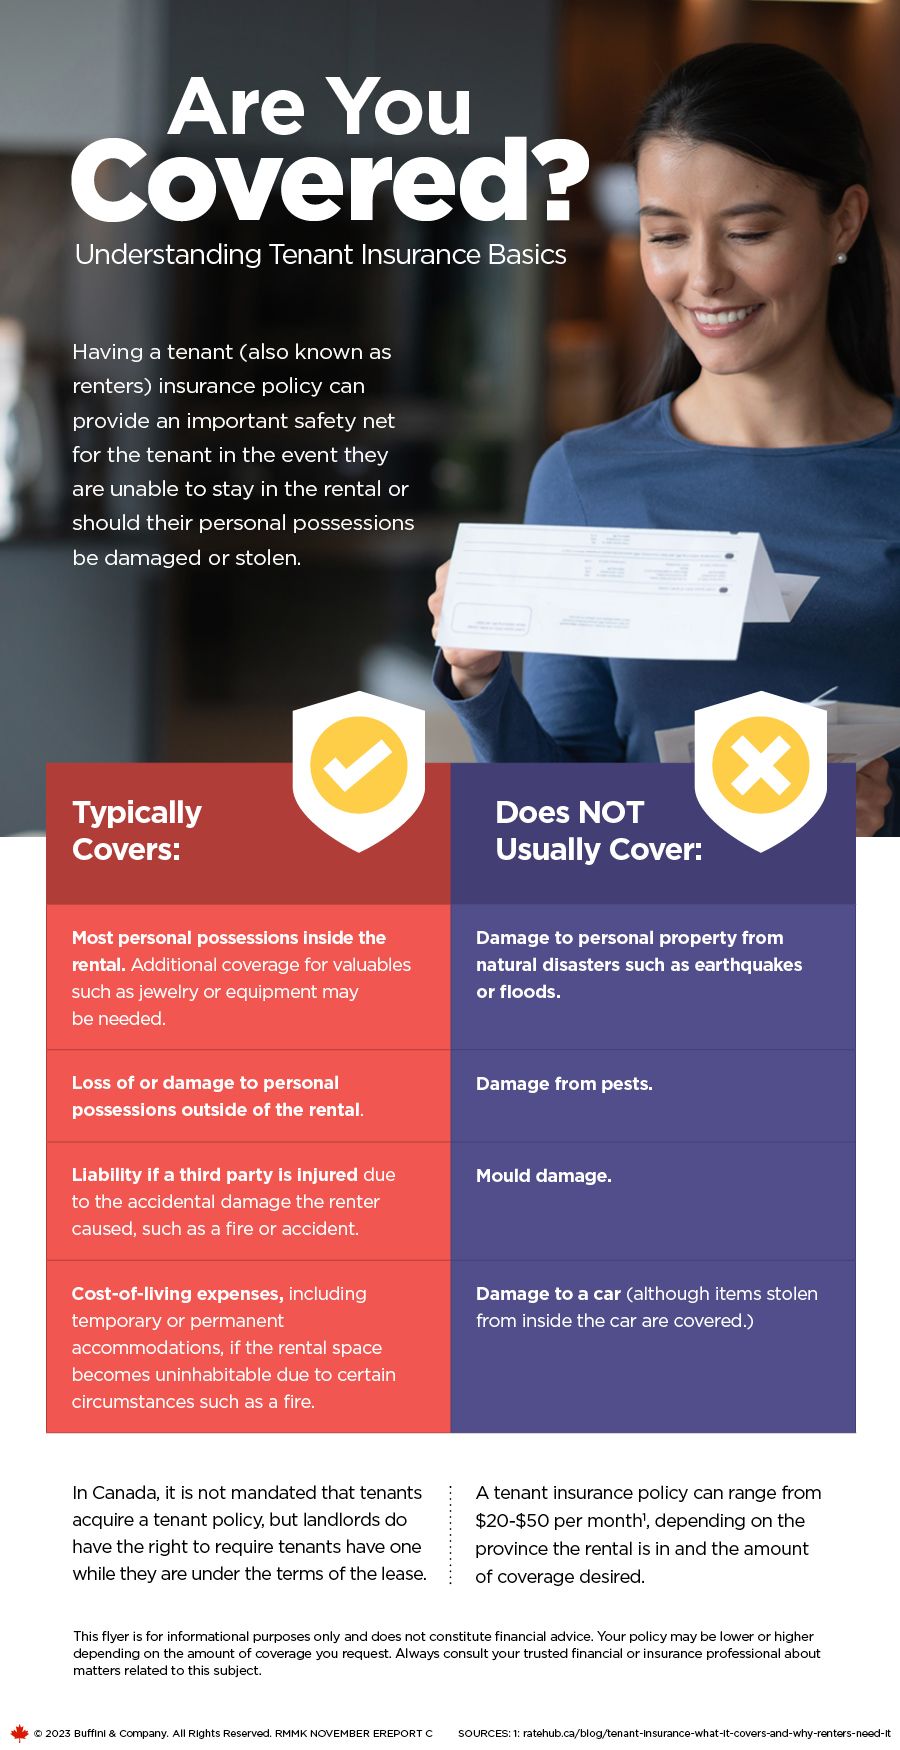 Are You Covered? Tenants Insurance Basics